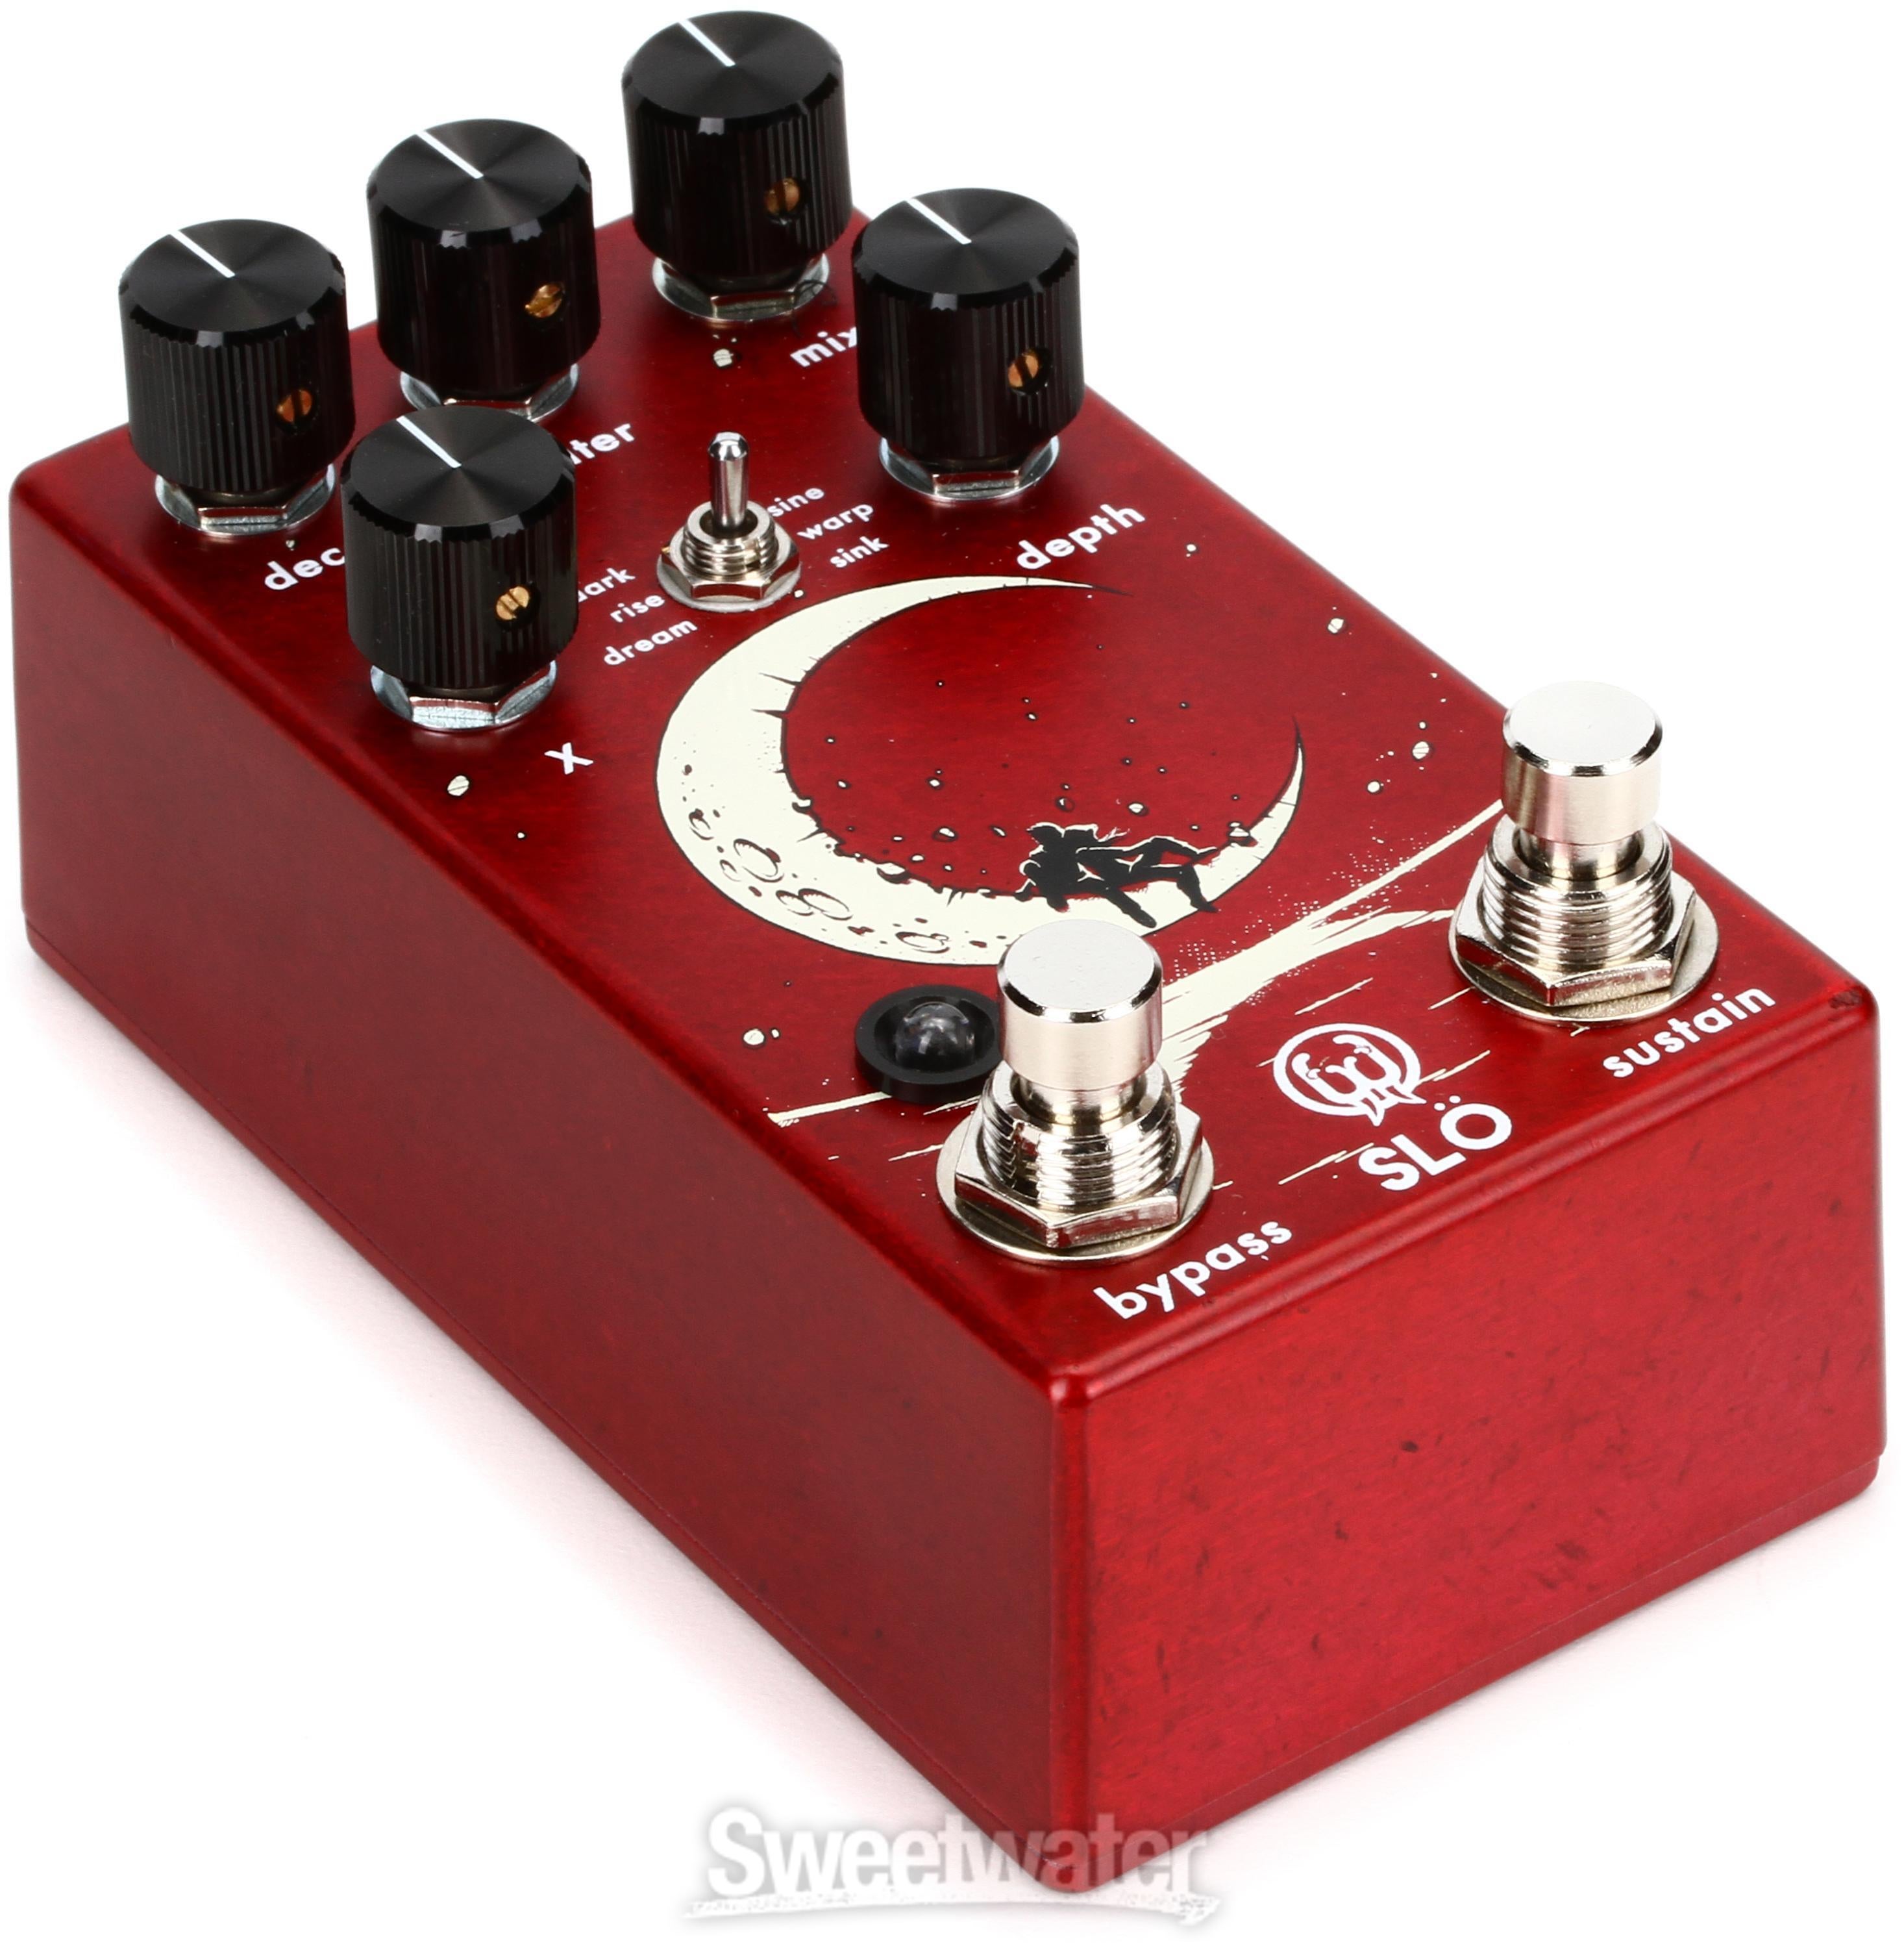 Walrus Audio Slö Multi Texture Reverb Pedal - Limited Edition Red